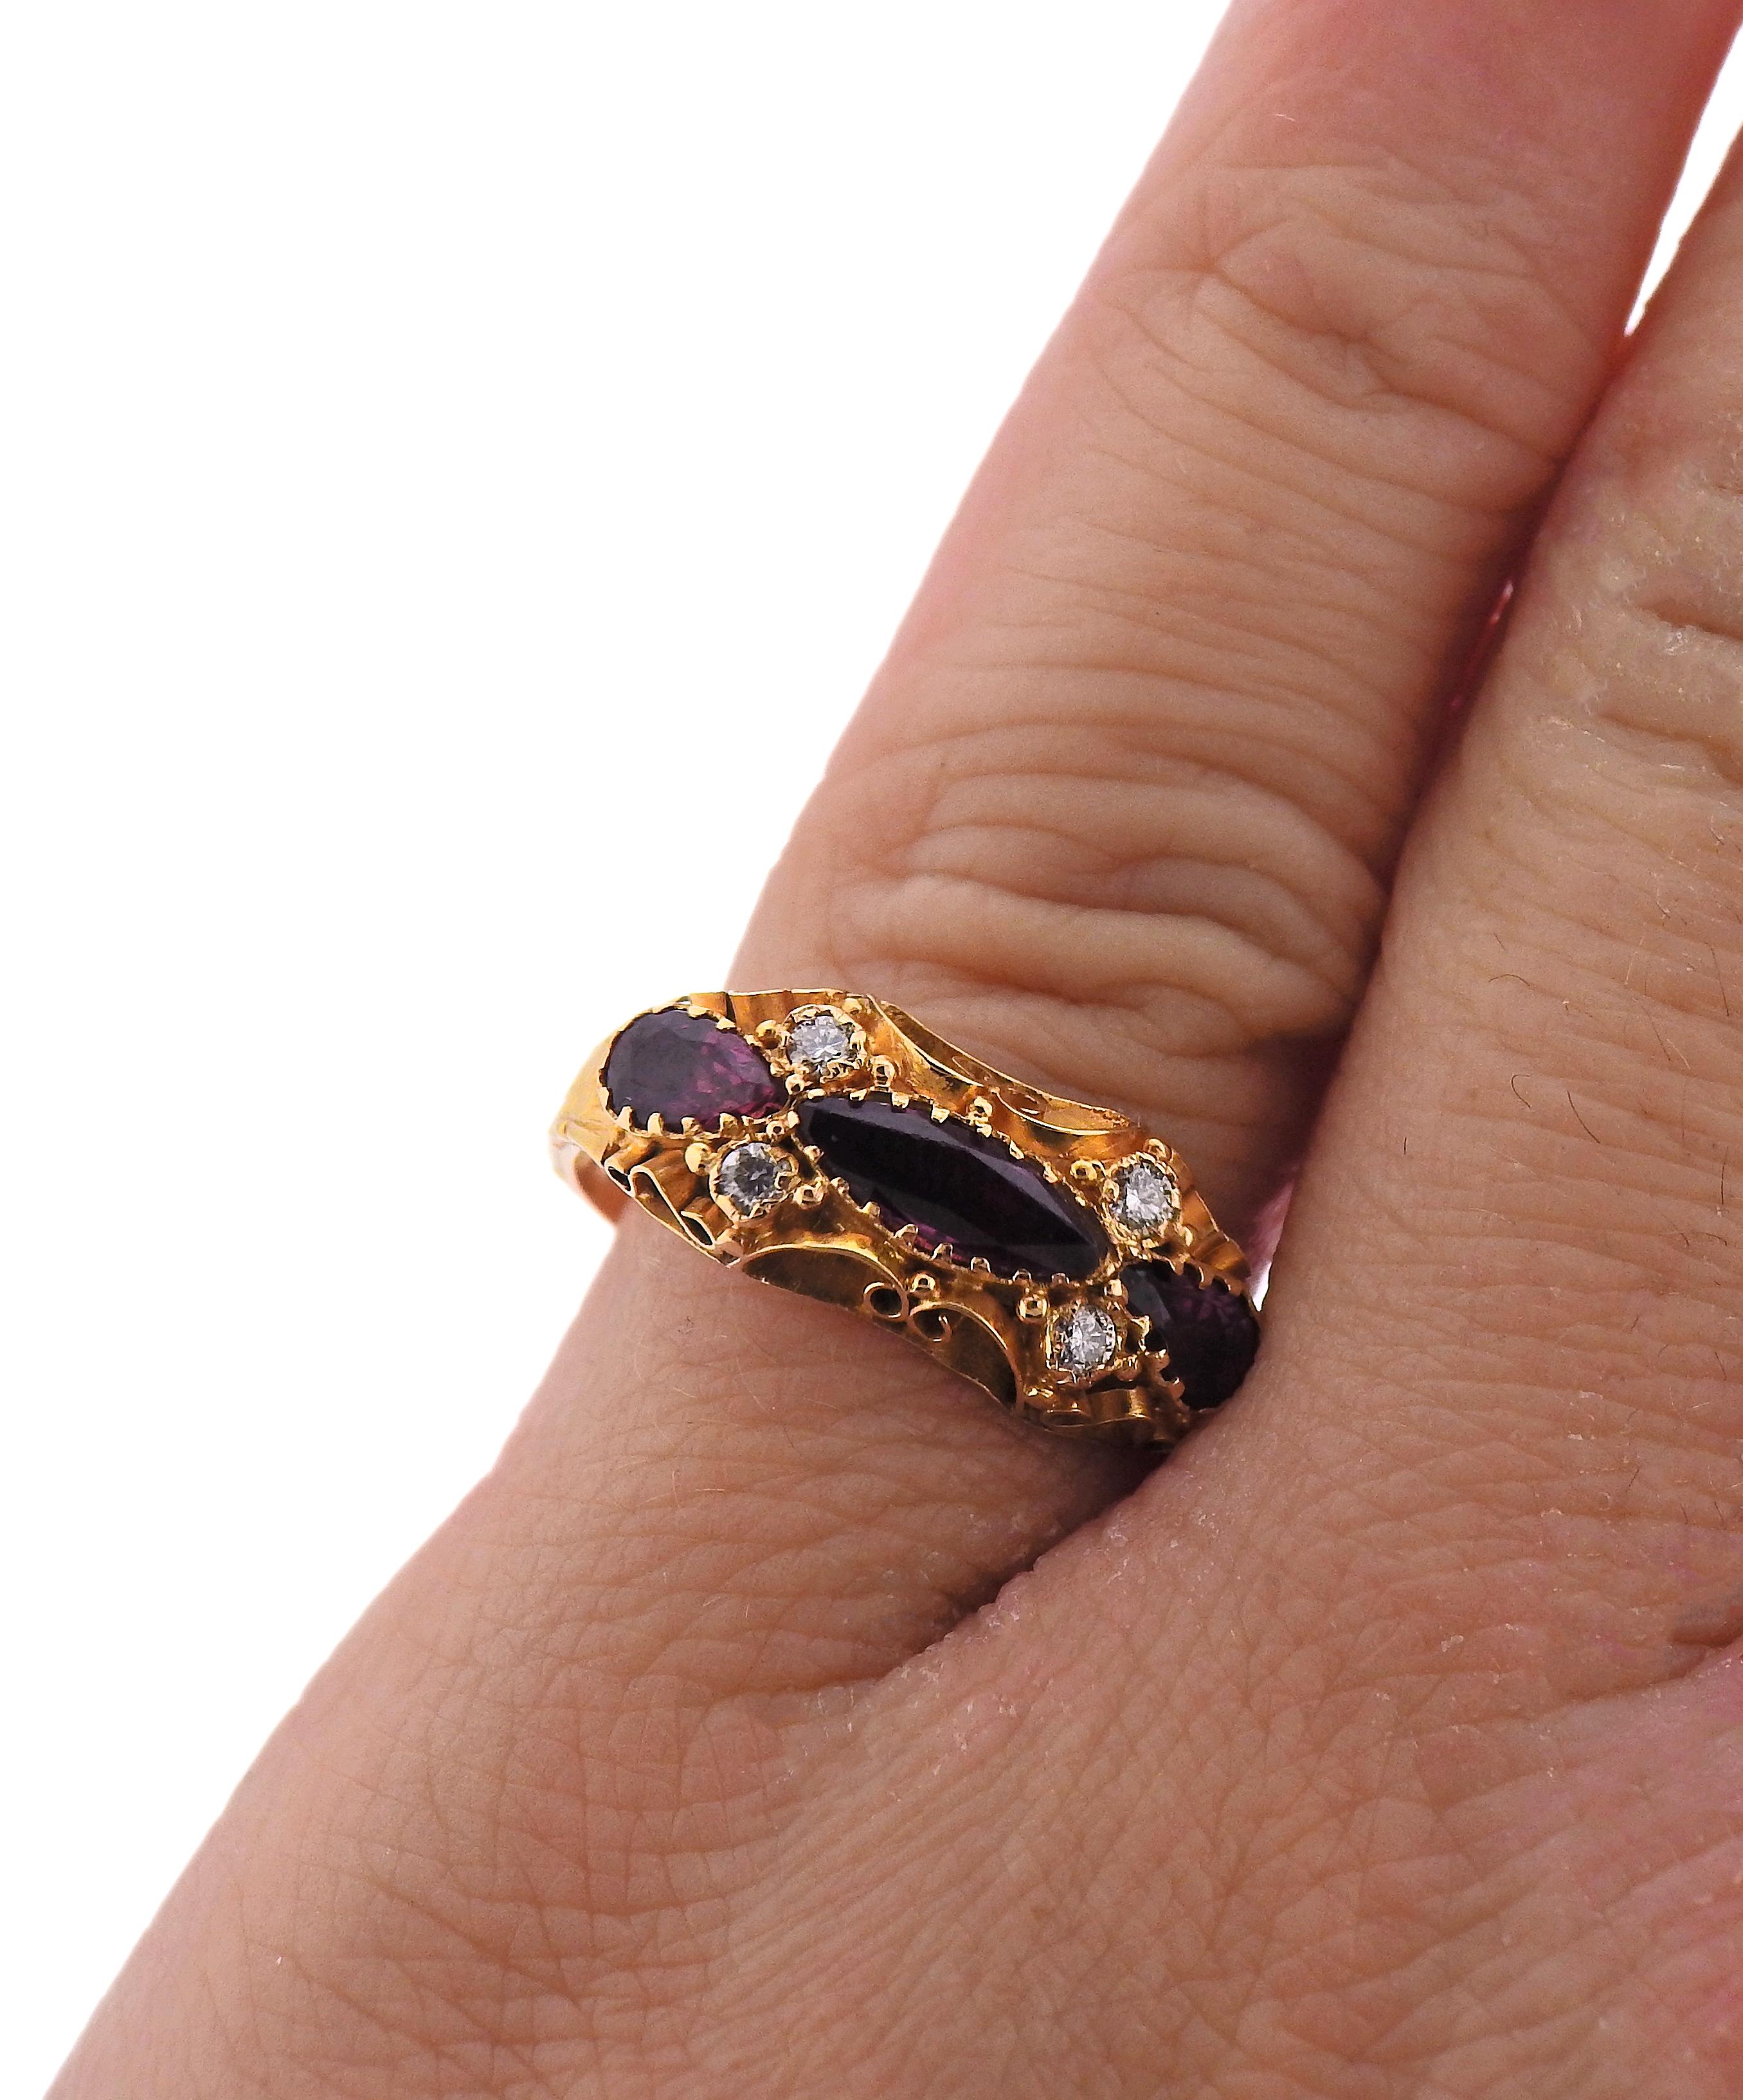 Antique English 15 Karat Gold Rubellite Diamond Ring In Excellent Condition For Sale In New York, NY